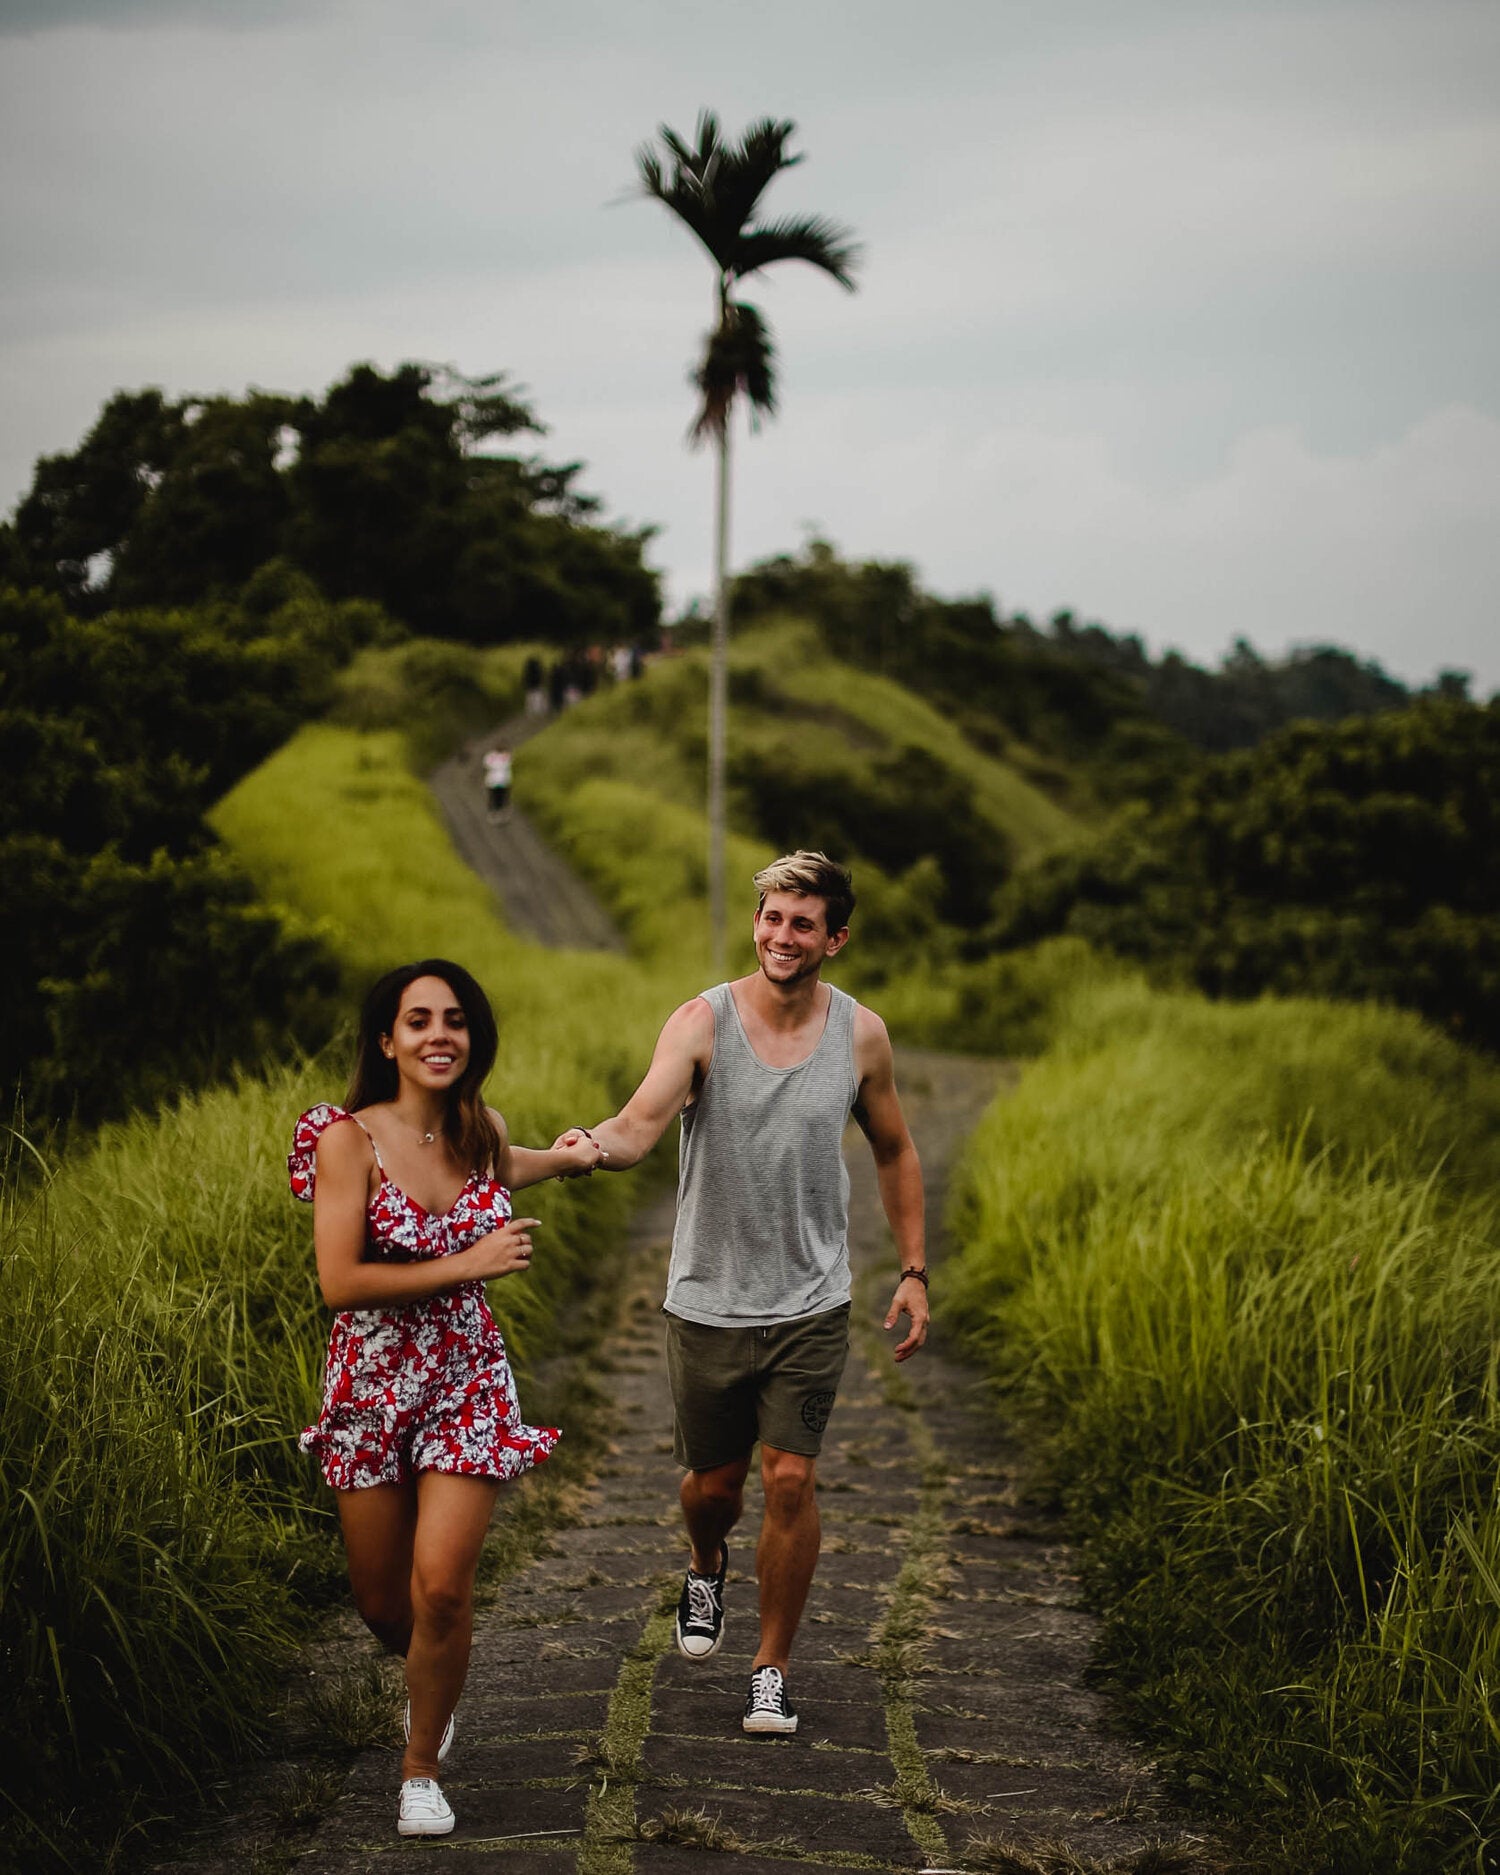 Lost LeBlanc and What The Chic at the Campuhan Ridge Walk in Ubud, Bali